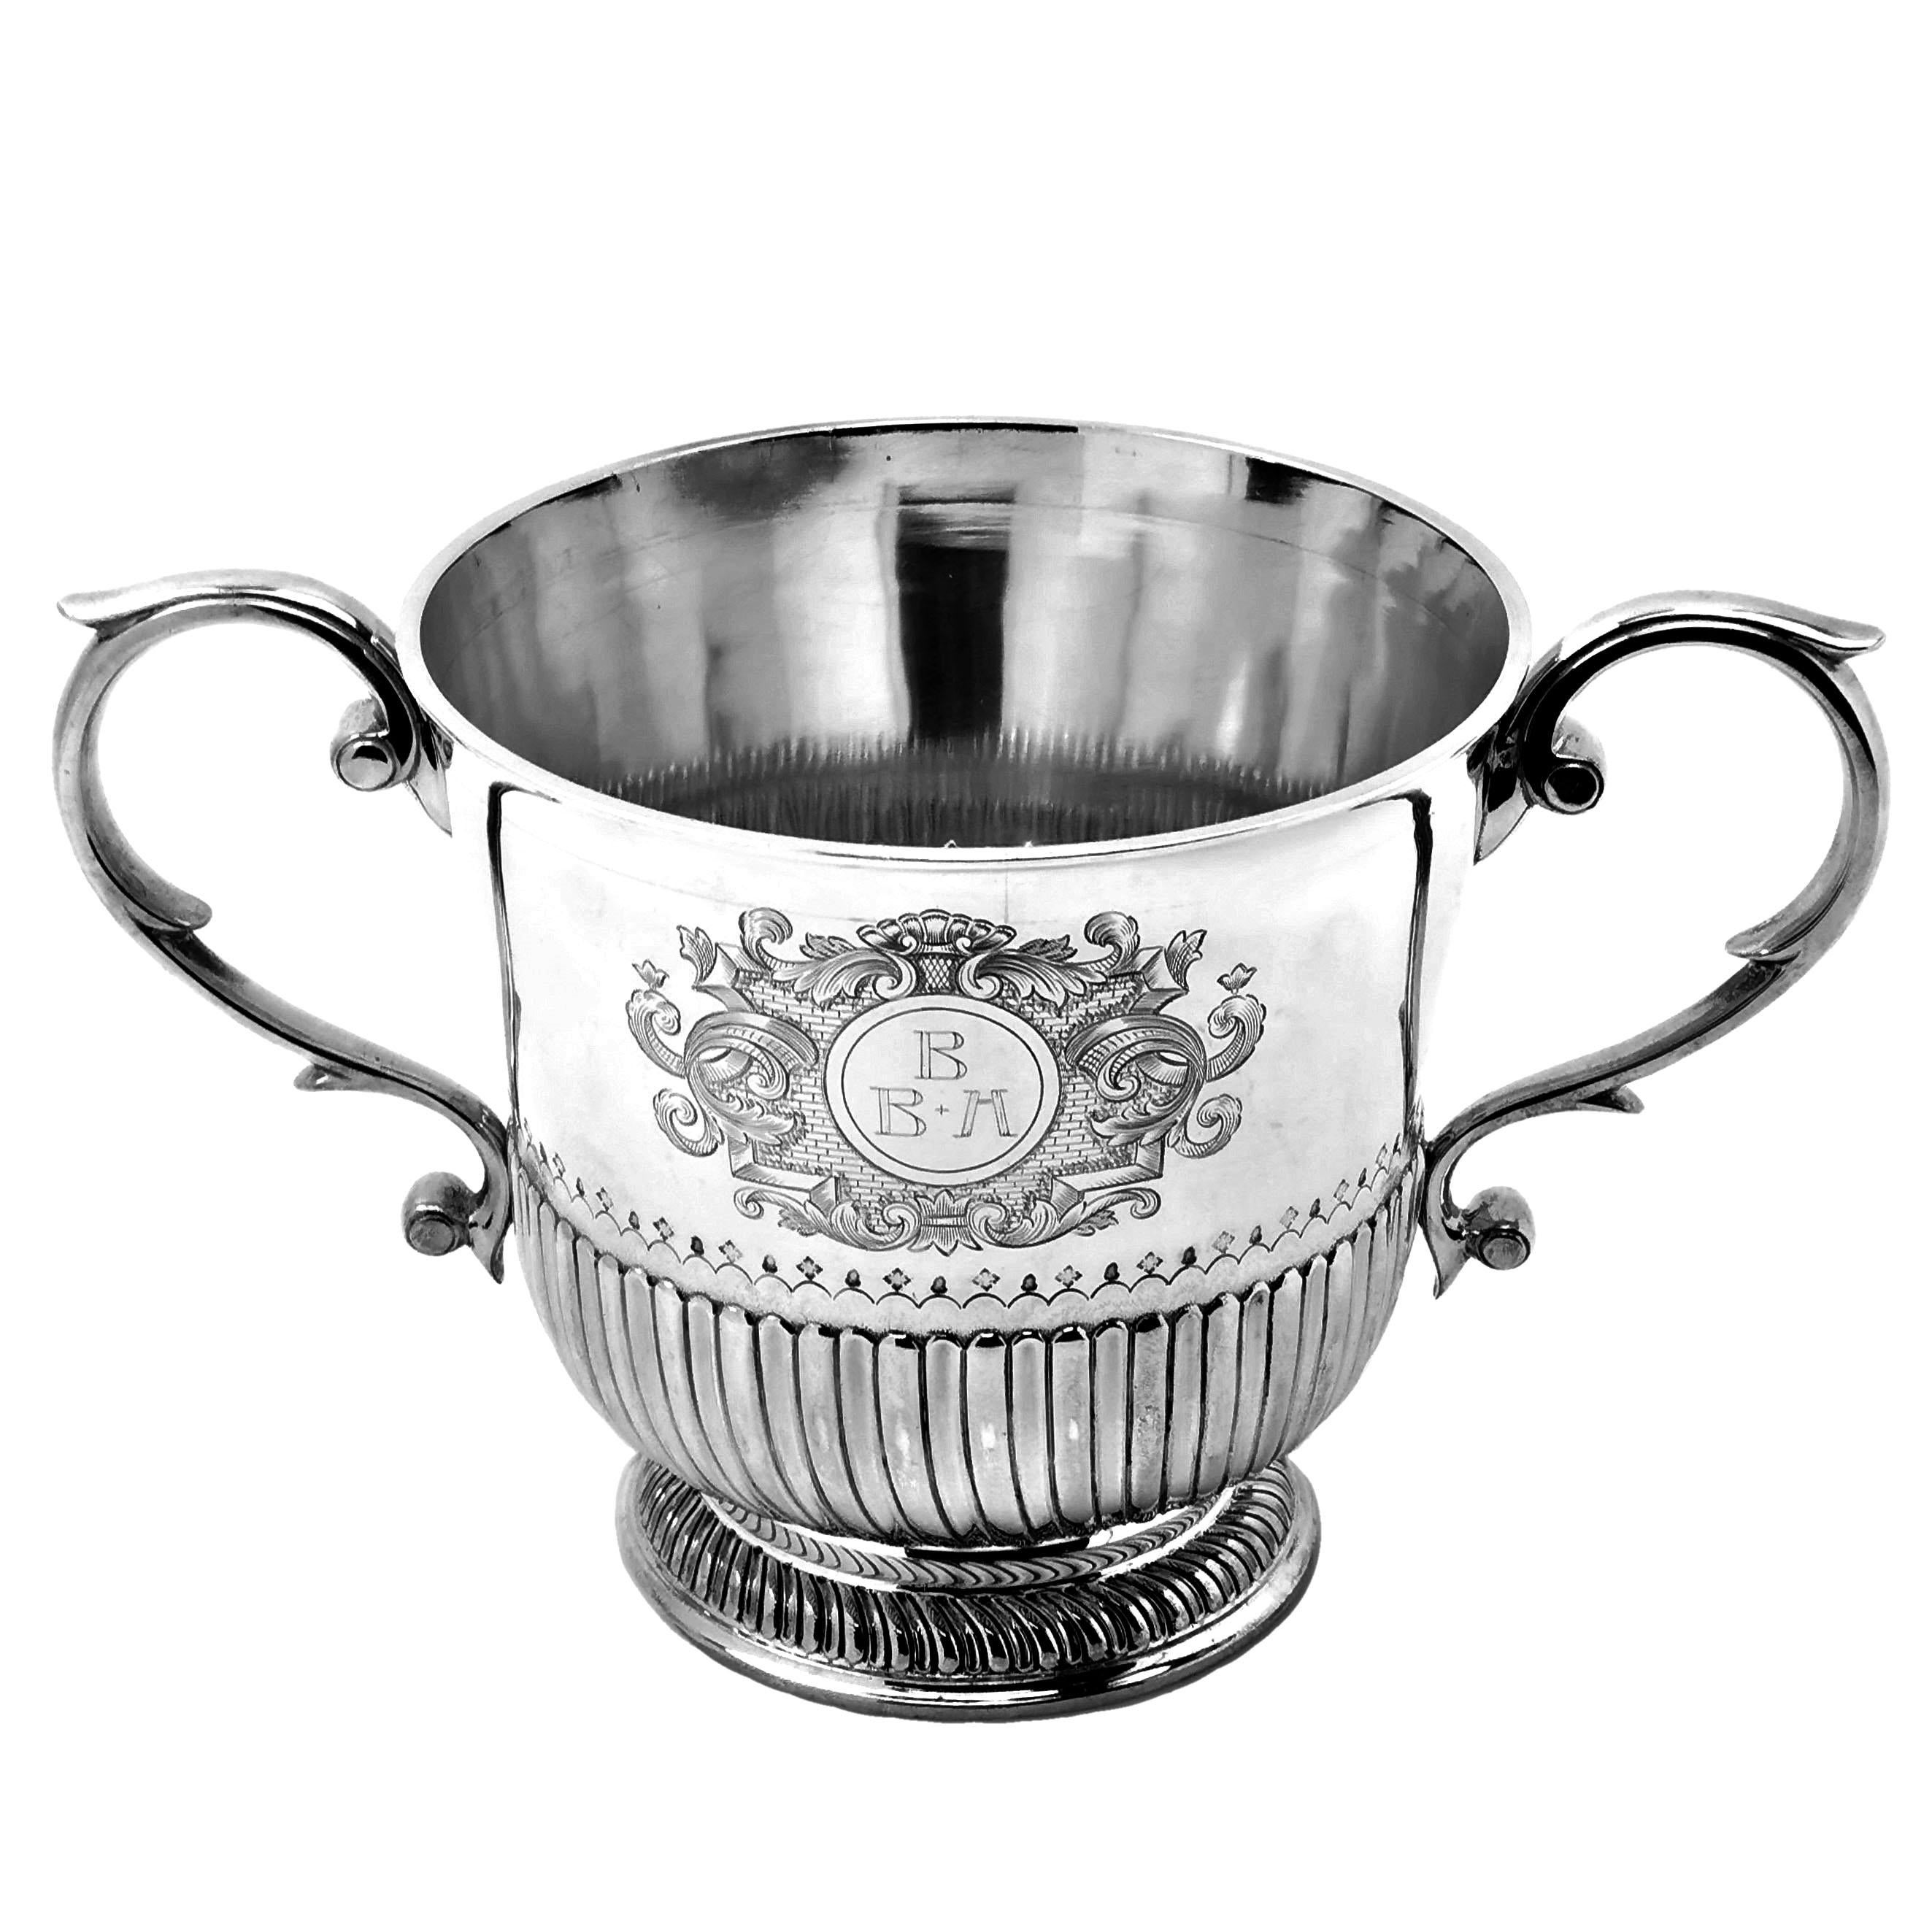 A magnificent Antique Silver Lidded Porringer or Cup & Cover made in the William III 17th century style. The body and lid of the Two Handled Cup are decorated with chased fluted bands and the body has an impressive engraved design on the one side.